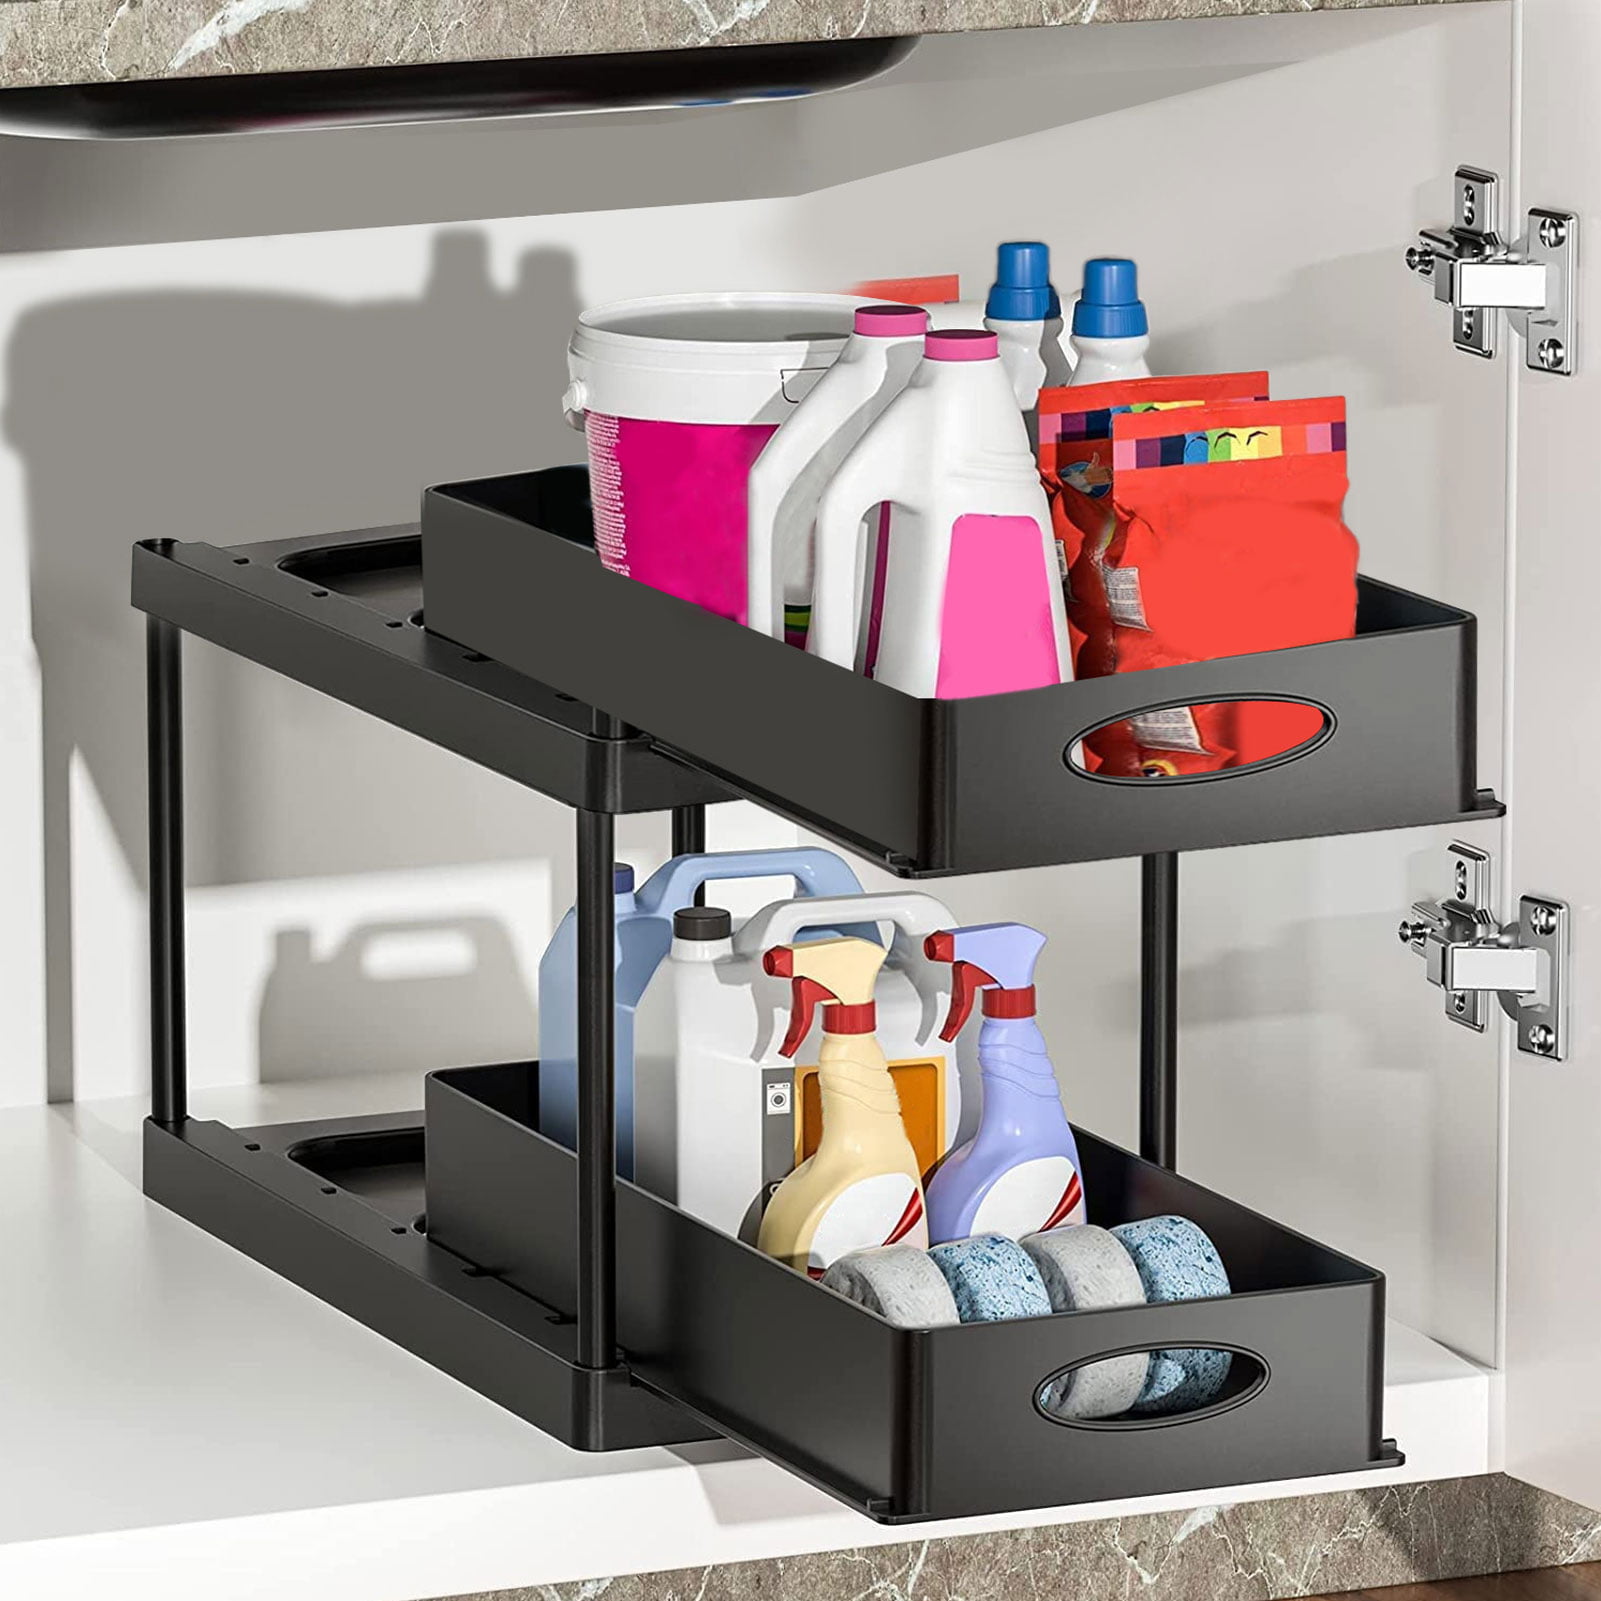 Bathroom Pull Out Spice Rack Grey Wall Mount Organizer Shelf for Cabinet Slide Out Plastic Storage Drawers Countertop 2 pcs Under Sink Organizers Jars Sliding Basket for Kitchen 